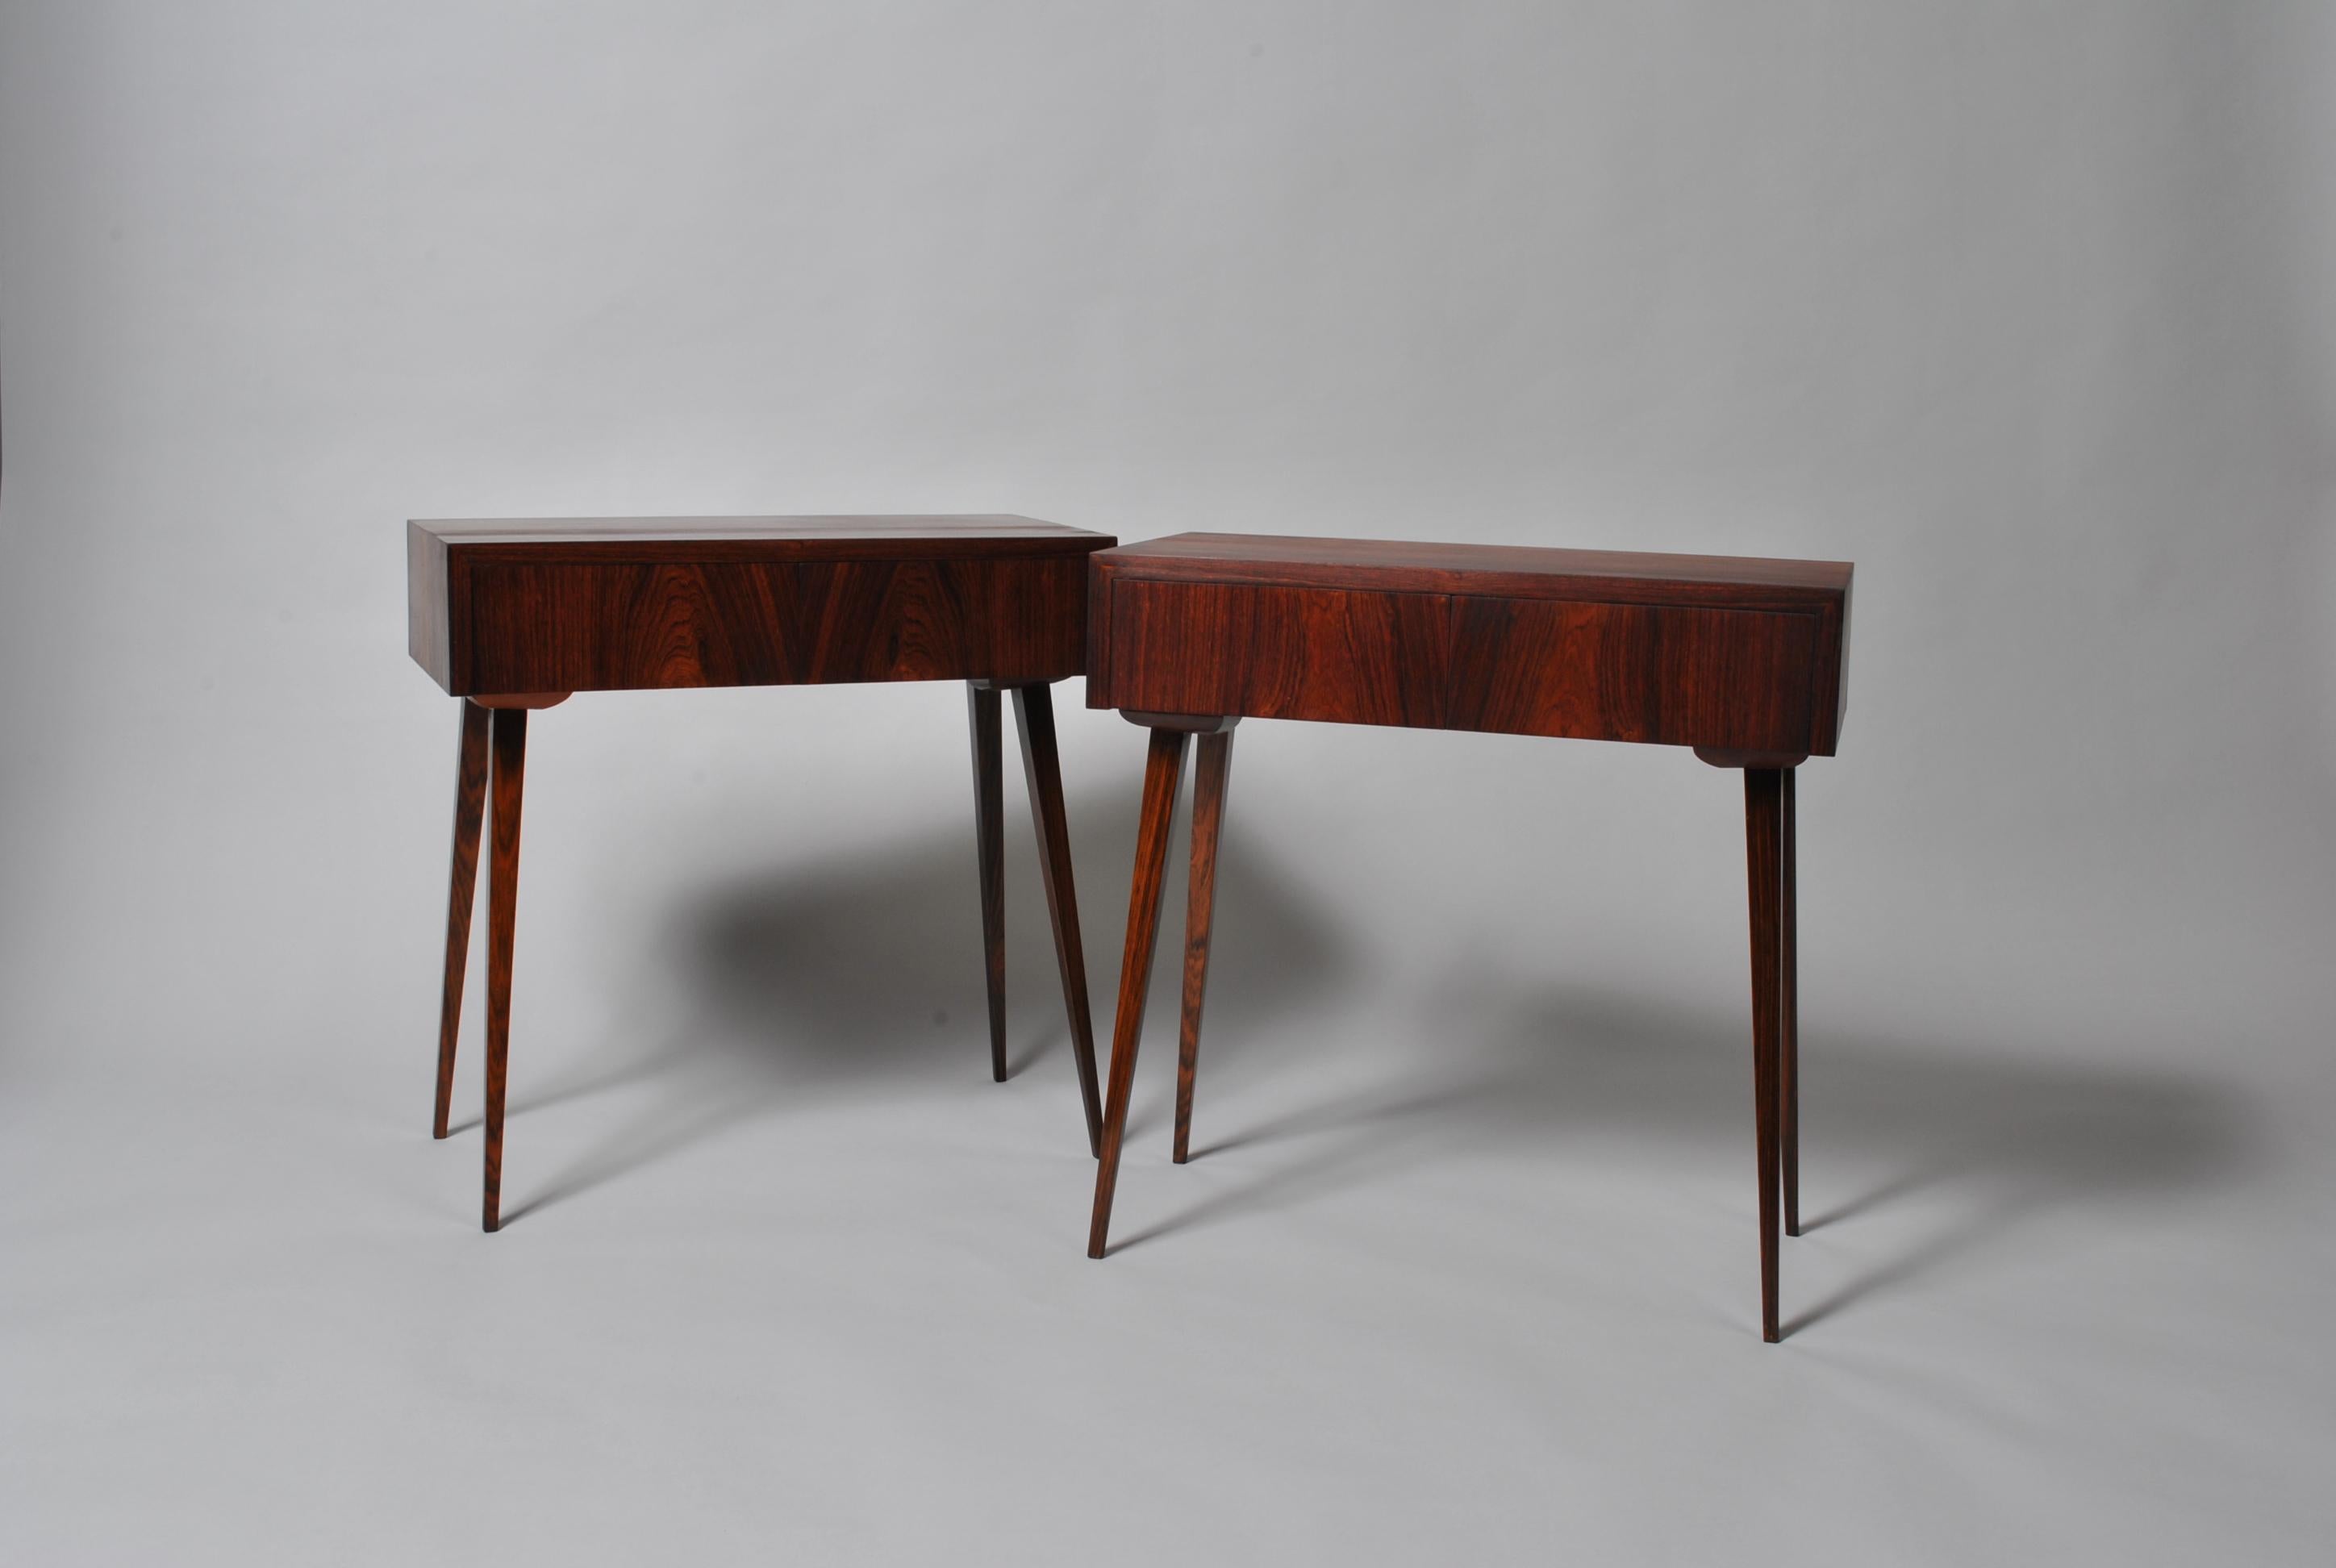 20th Century Danish Midcentury Nightstands, Modernist End Tables